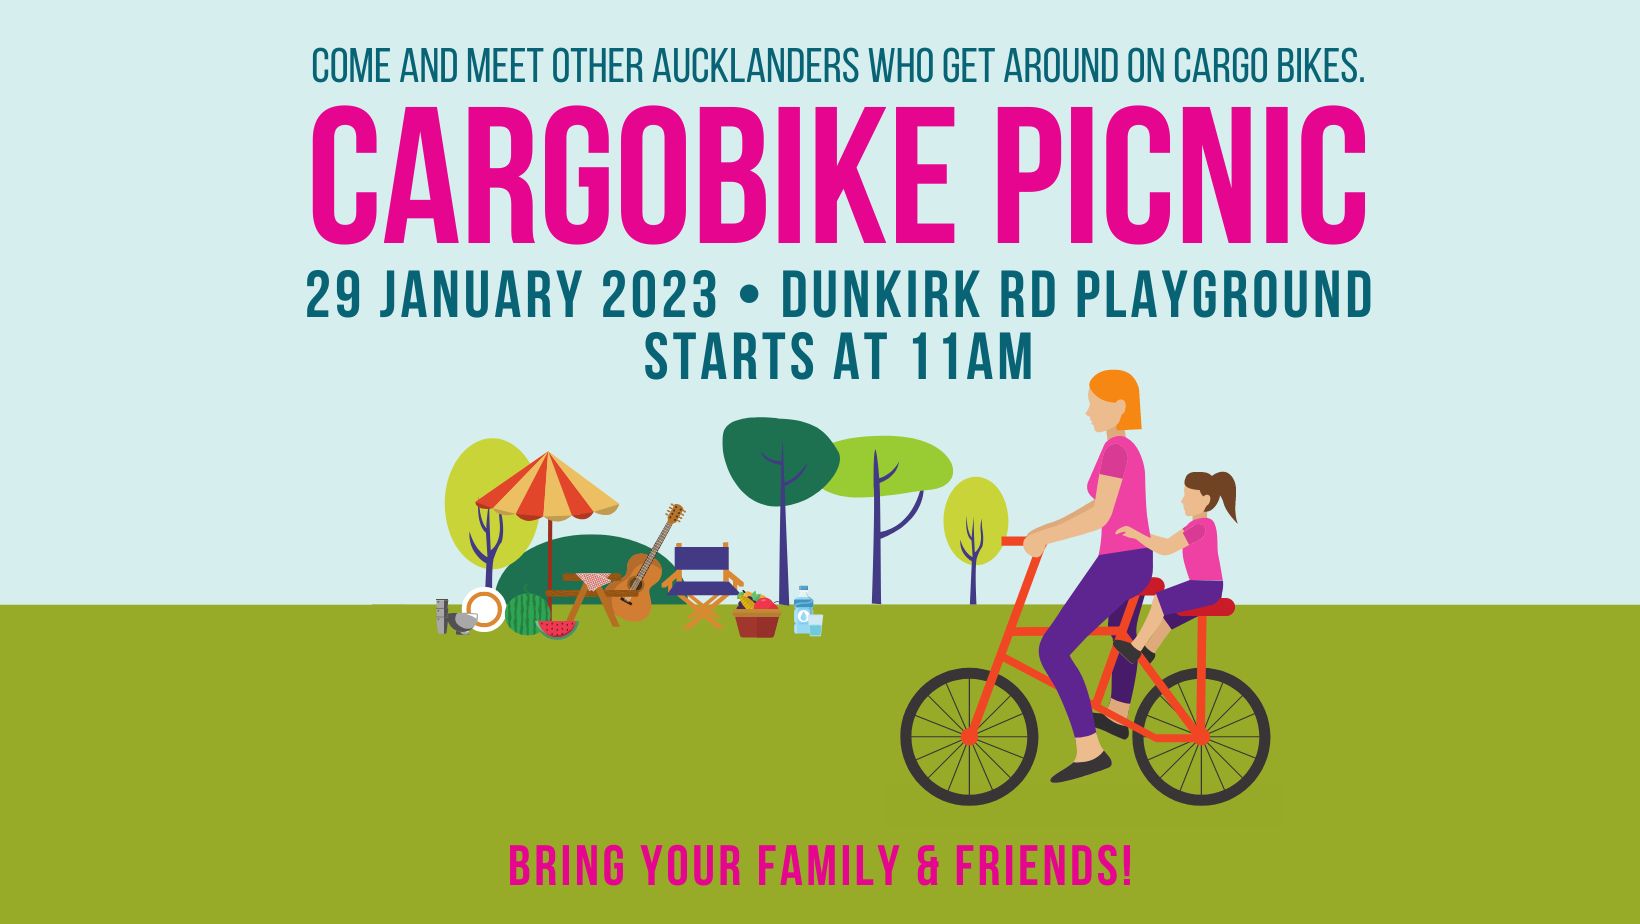 Digital image, with simple cartoonish graphics. Text reads: Come and meet other Aucklanders who get around on cargo bikes. Cargobike Picnic. 29 January 2023 - Dunkirk Road Playground. Starts at 11am. Bring your family and friends! Graphic is of an open field, with a few trees, an umbrella, a guitar, some picnic supplies. In the foreground, an adult is riding a bike, while a child rides in a rear seat.